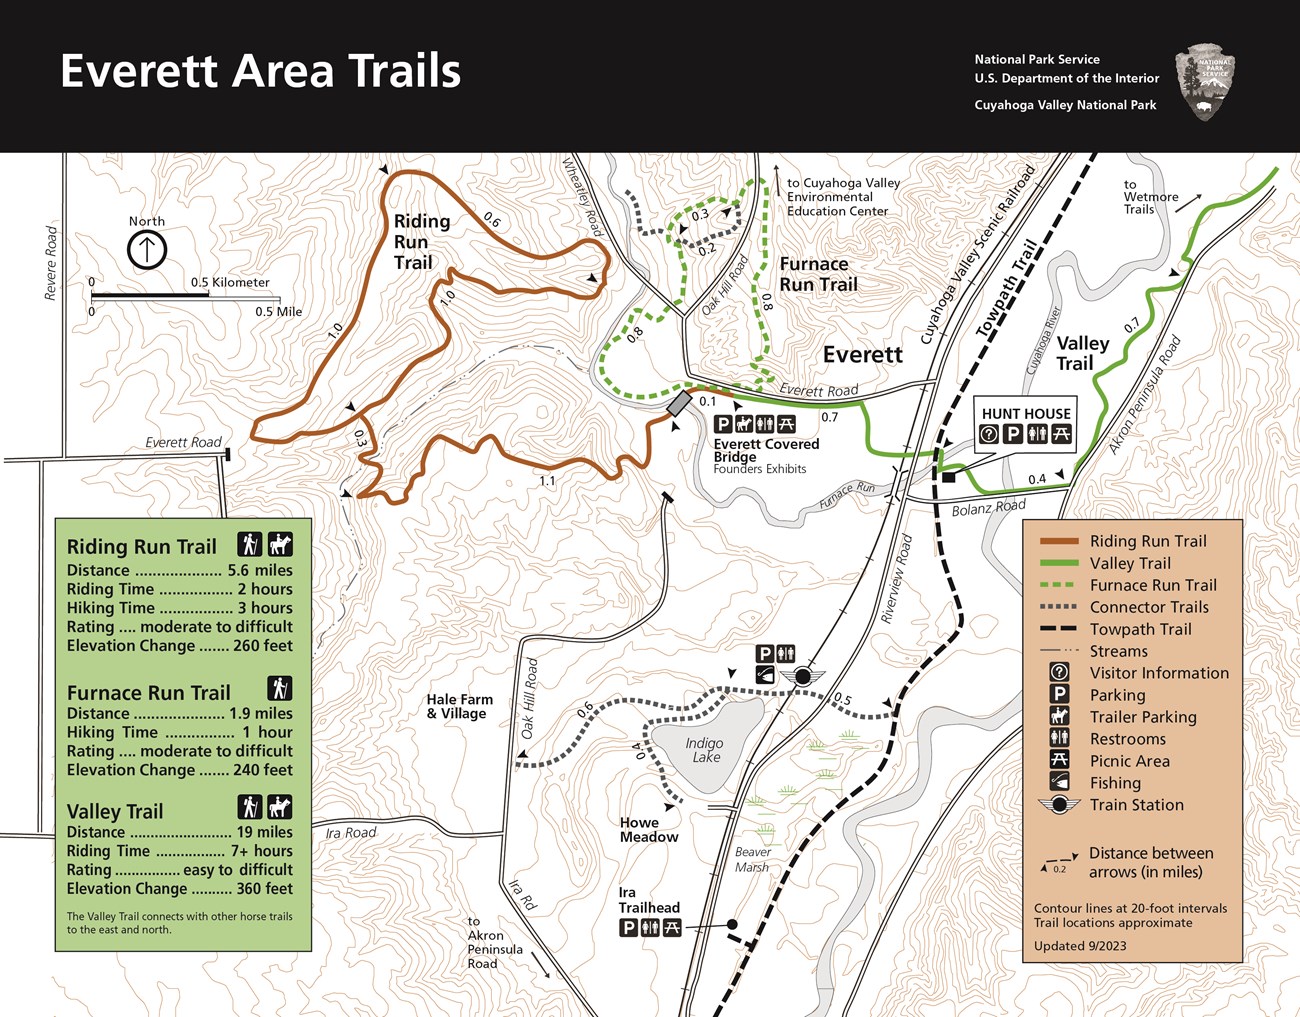 Trail map with black bar at top and white text, "Everett Area Trails"; includes information about Riding Run Trail, Furnace Run Trail, and Valley Trail.